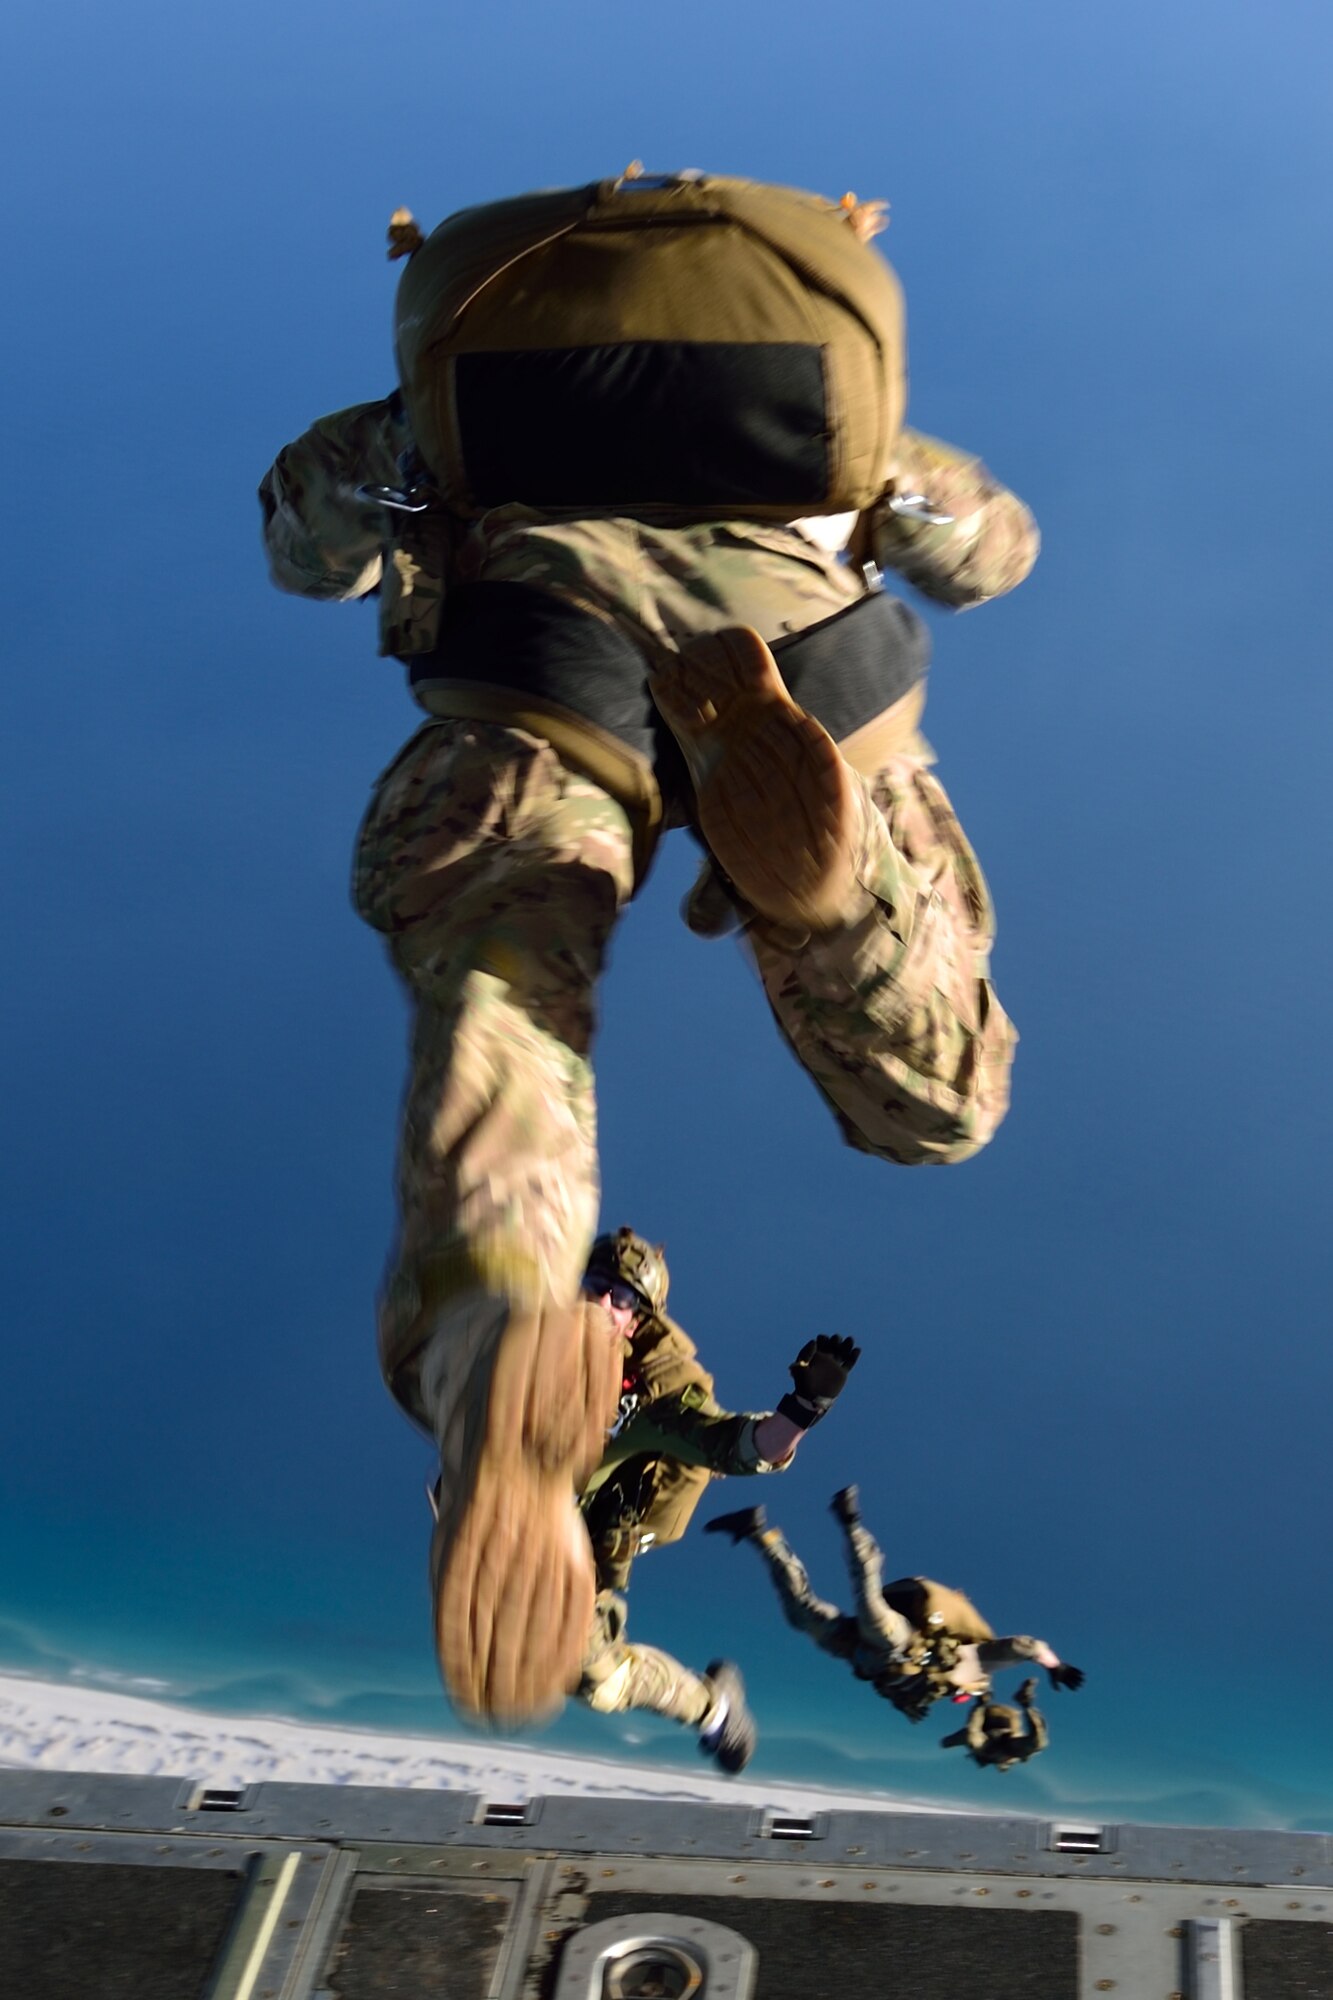 Special Forces members jump out the back of a C-130J Super Hercules aircraft March 2 during Emerald Warrior 2018. The 815th AS “Flying Jennies” from Keesler Air Force Base, Mississippi, provided airlift support for Emerald Warrior 2018, a special operations joint training event involving various units from all U.S. military branches, the U.S. Special Operations Command and North Atlantic Treaty Organization partner forces from Feb. 26 to March 9. (U.S. Air Force photo by Tech. Sgt. Ryan Labadens)